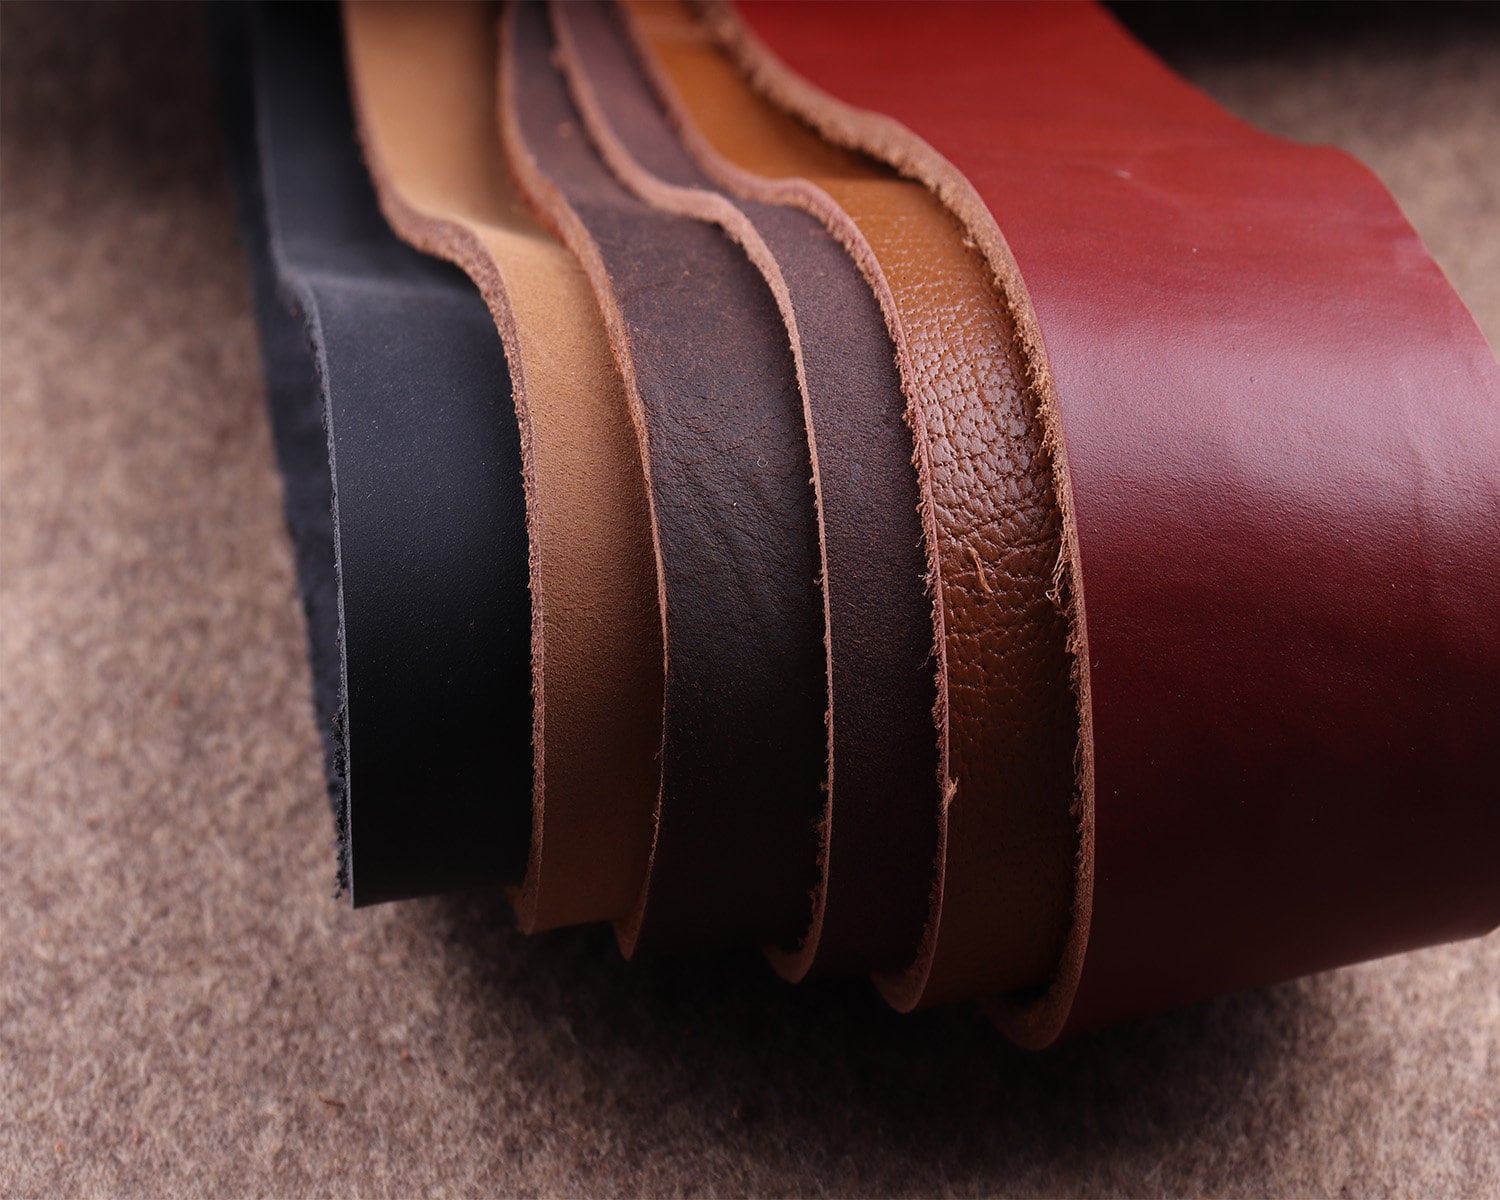  CORHAD 1 Roll Leather roll Leather Strips for Leather